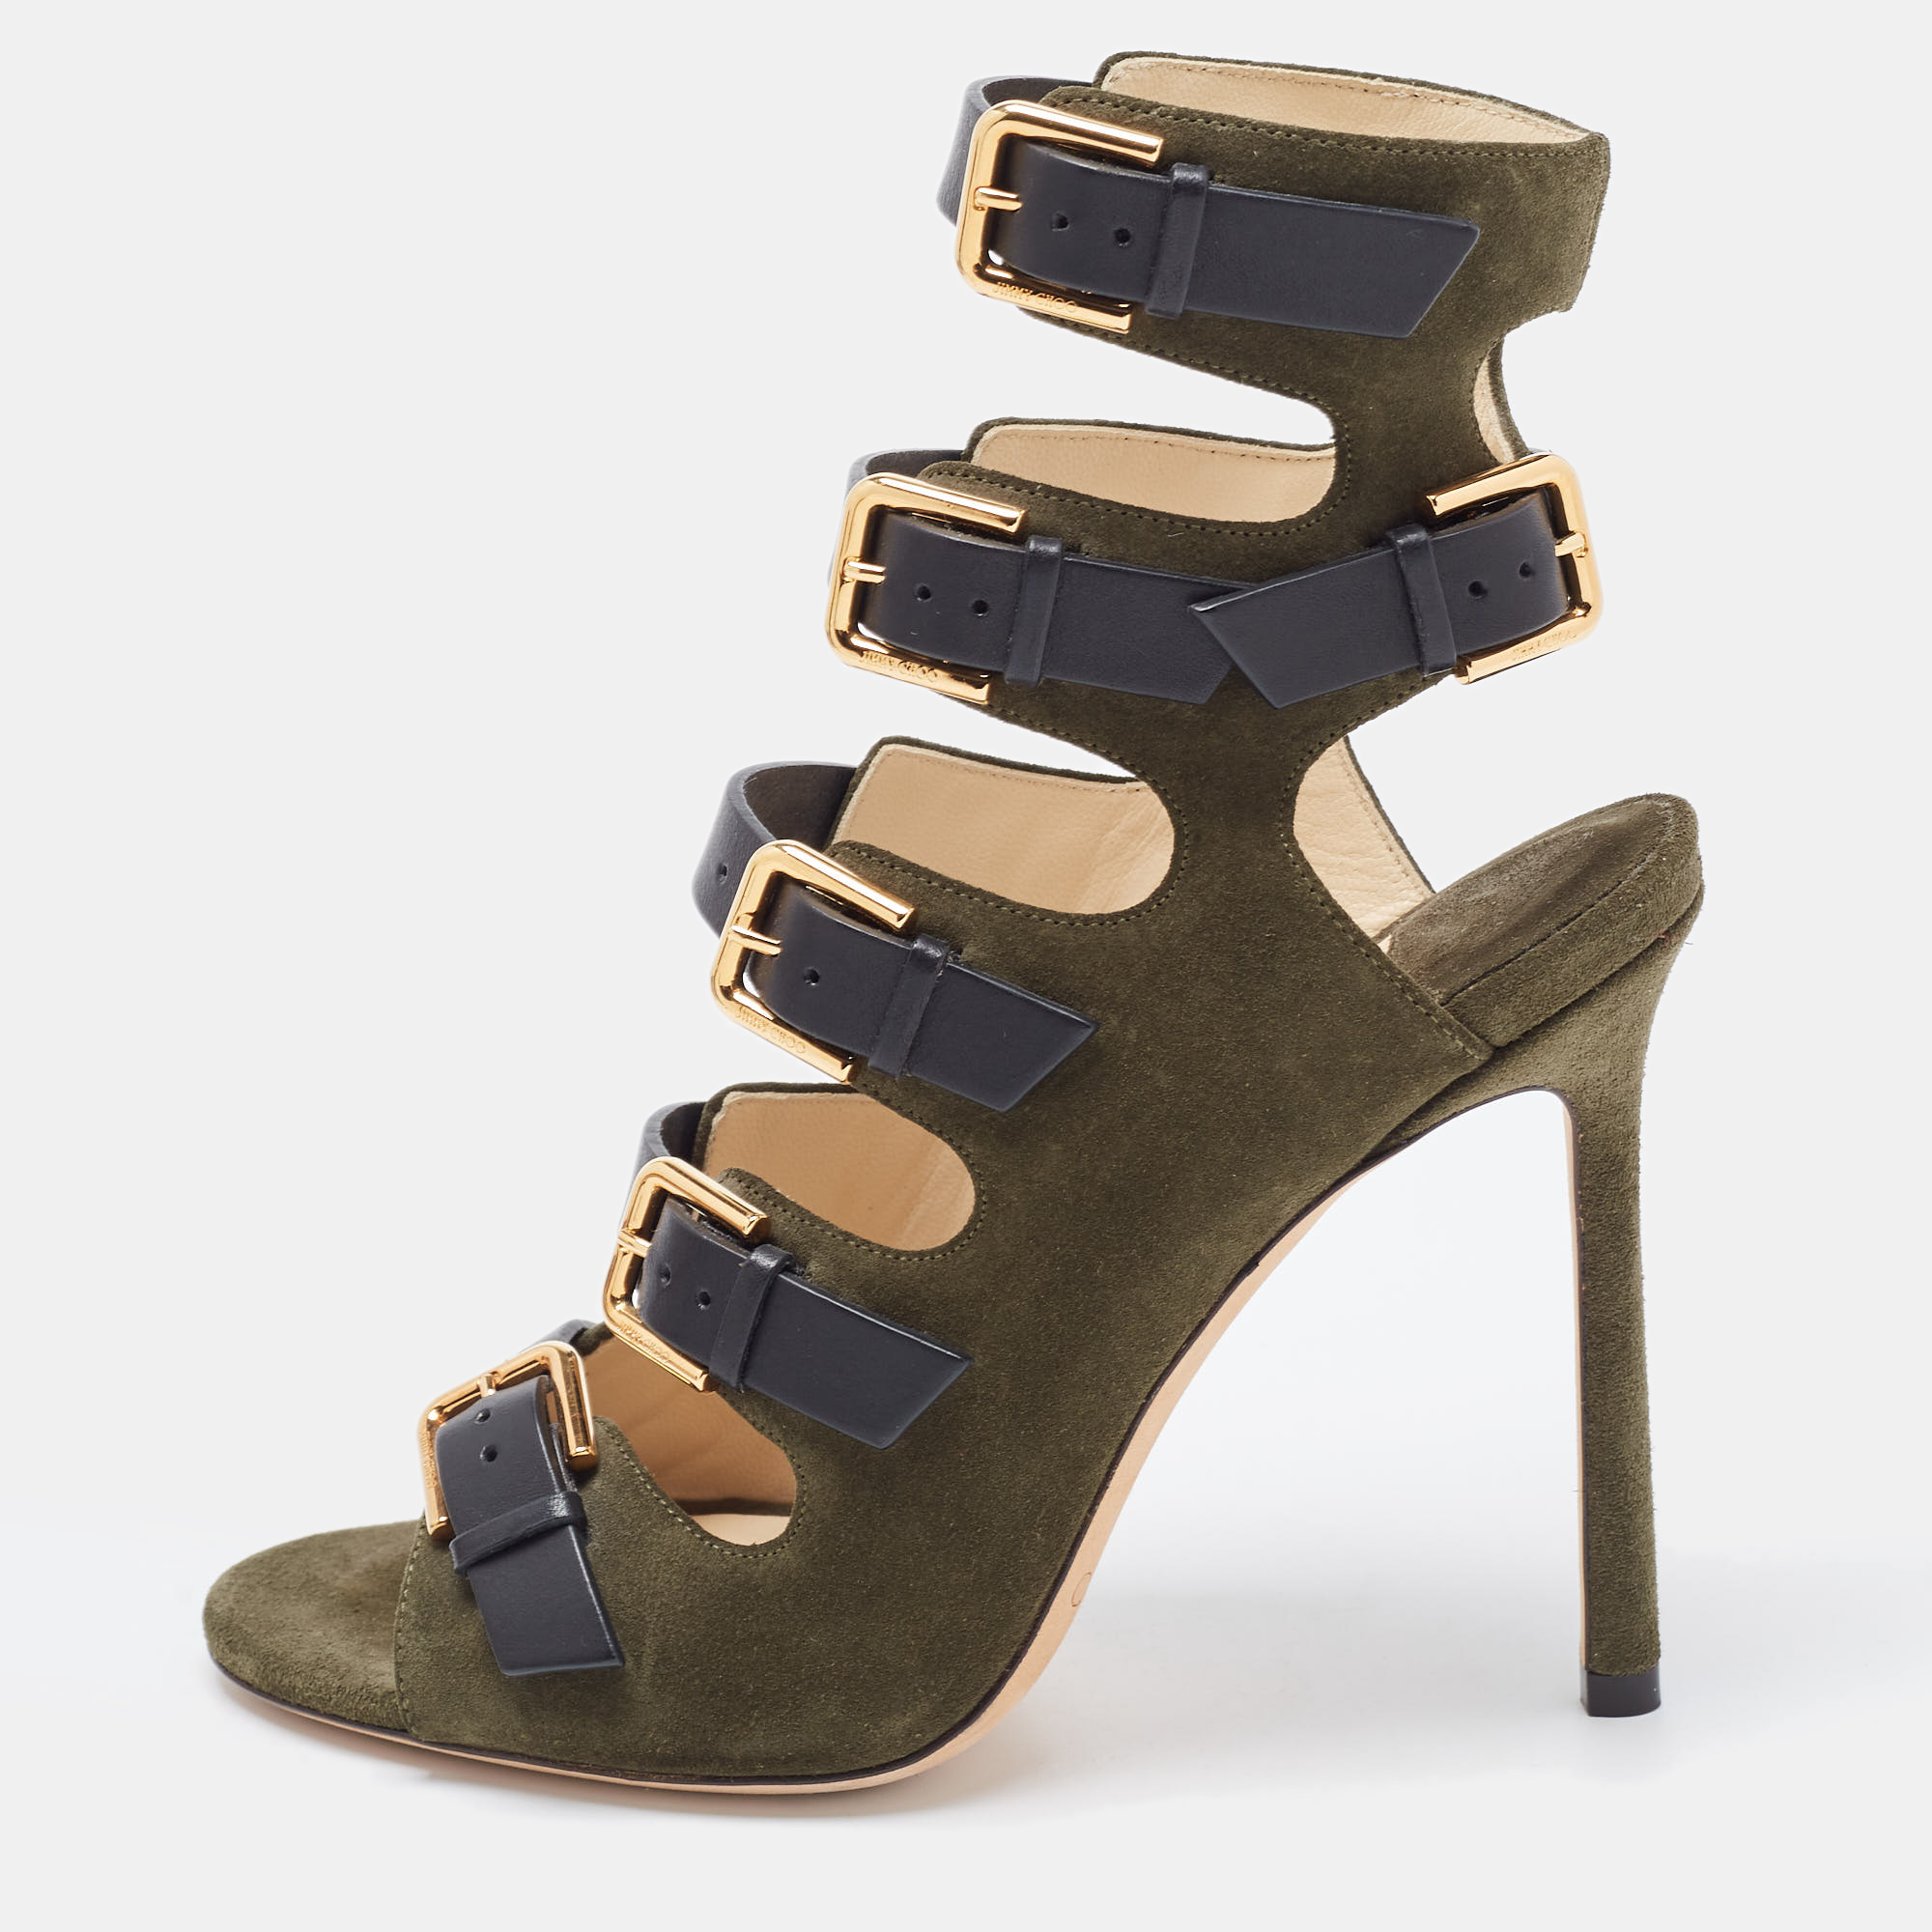 Jimmy choo green/black suede and leather strappy sandals size 36